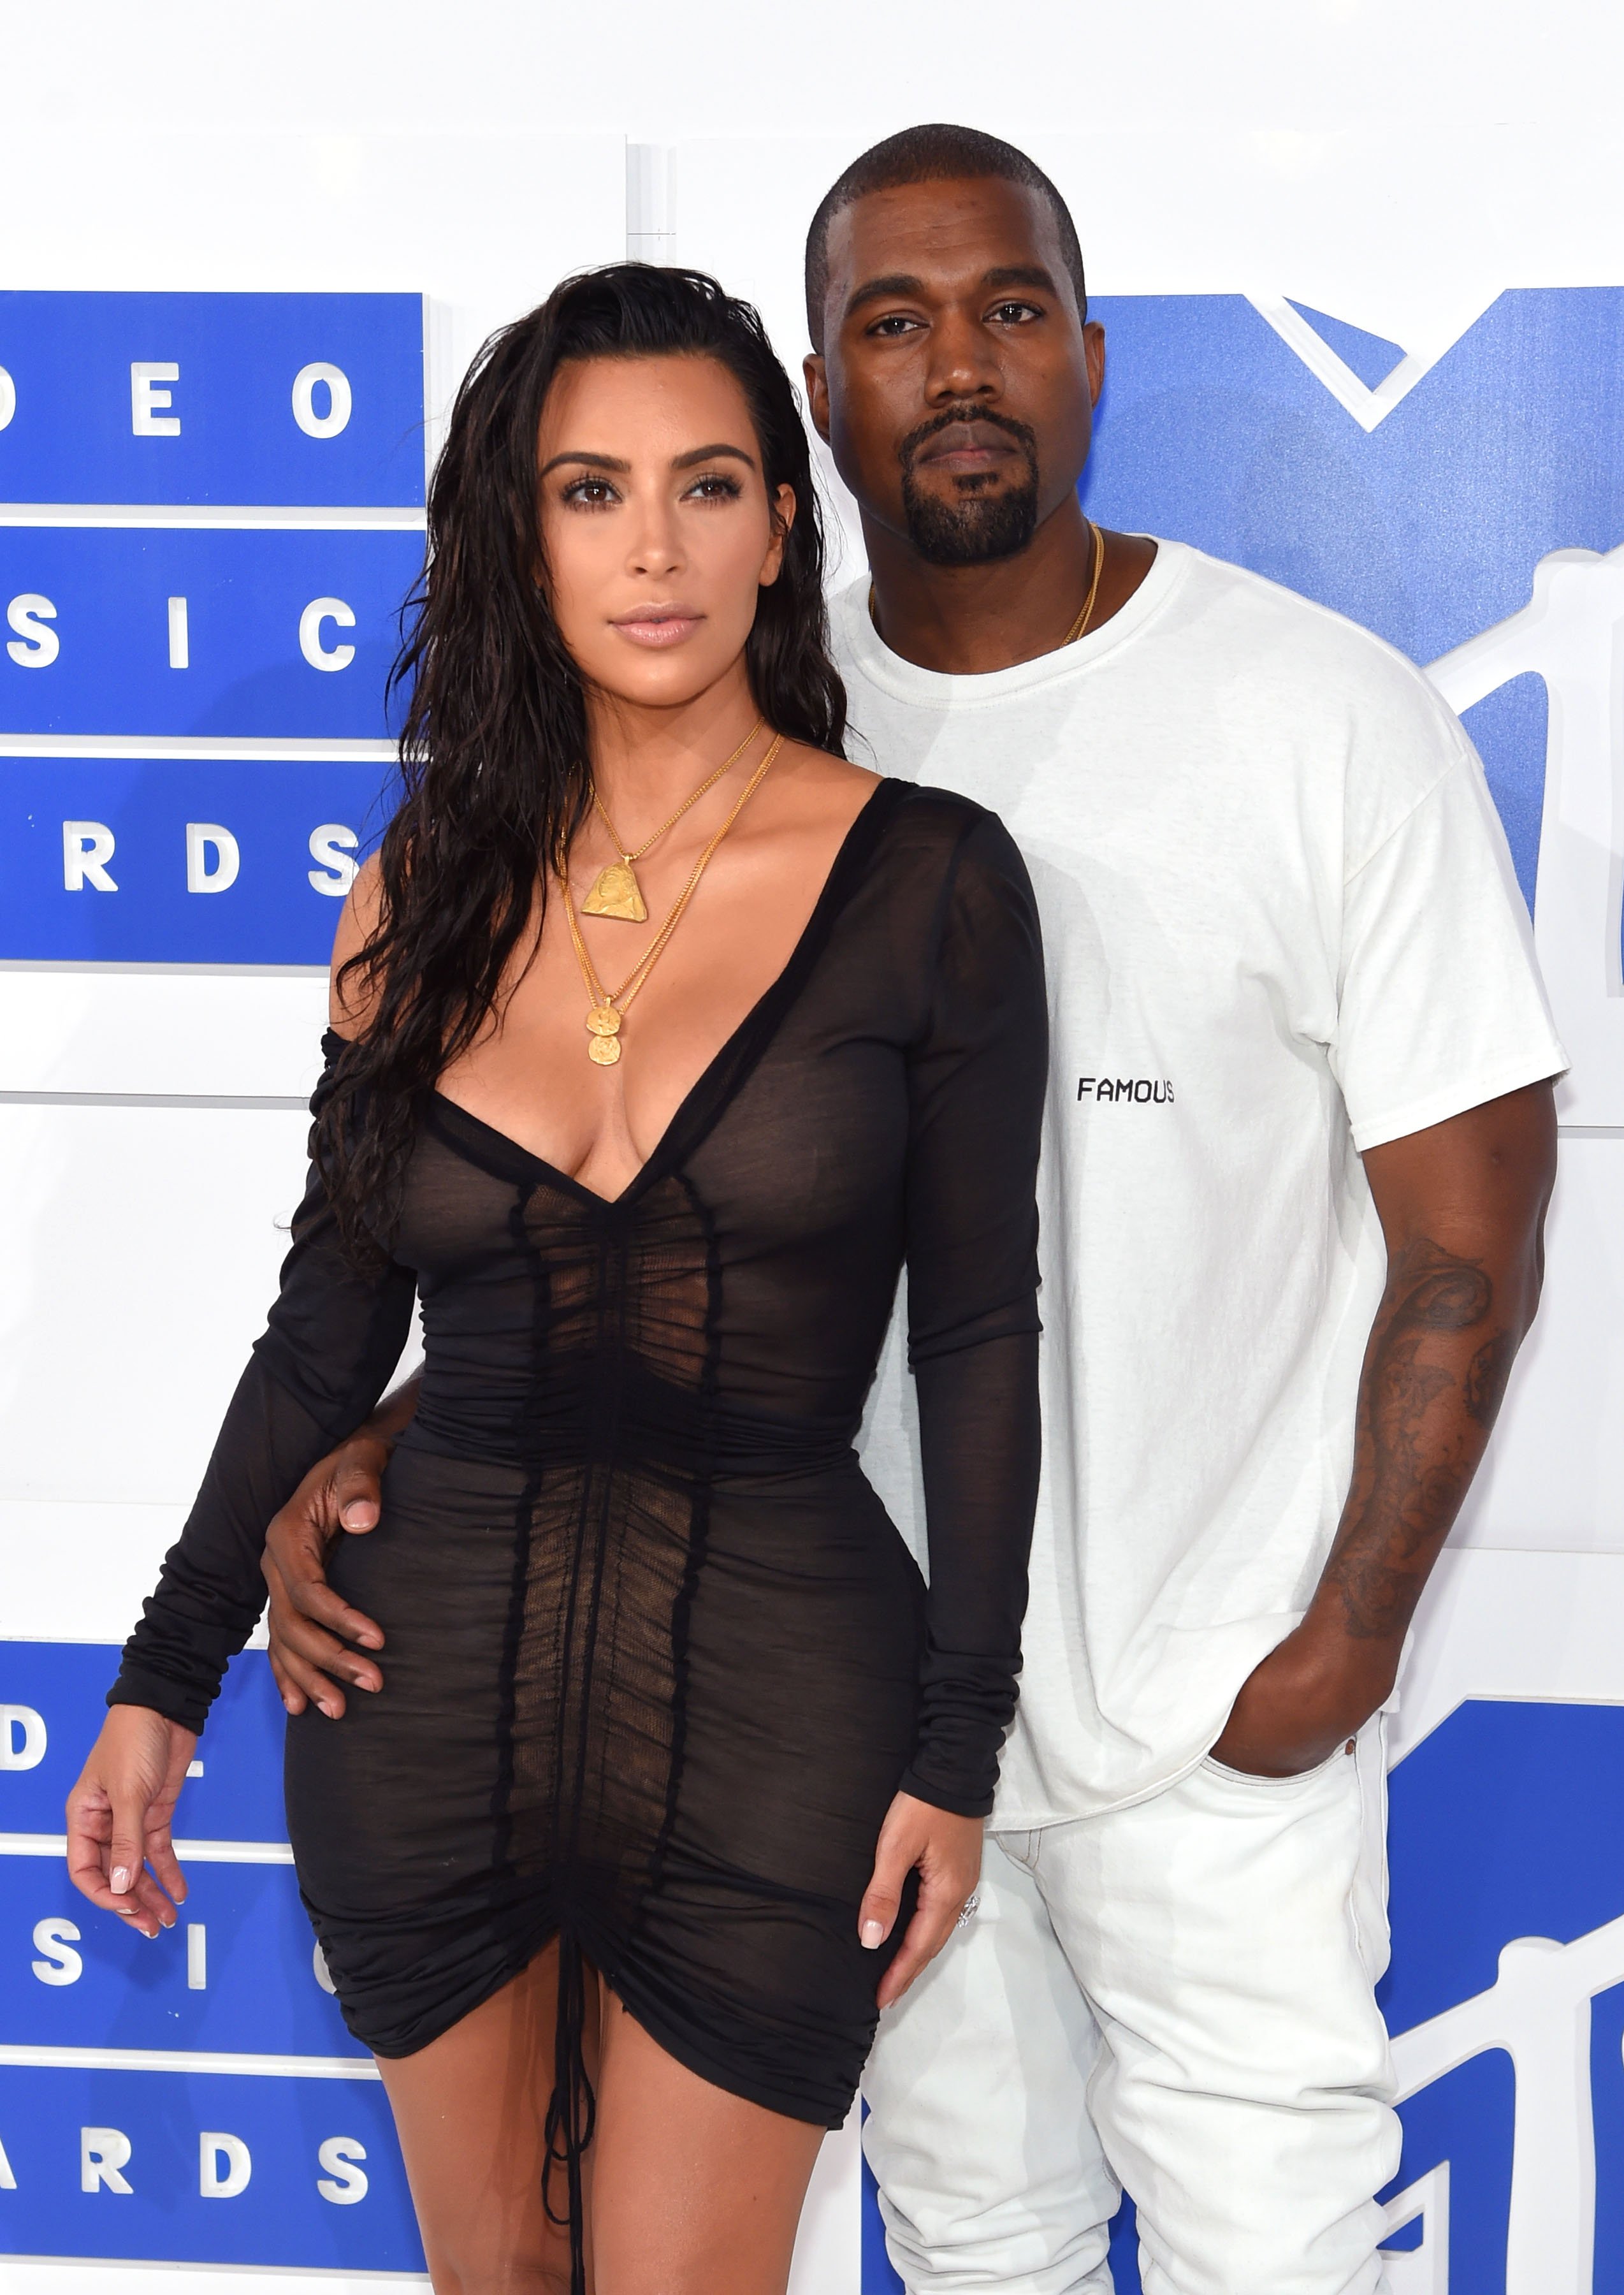 Kanye West and Kim Kardashian West attend the 2016 MTV Video Music Awards at Madison Square Garden on August 28, 2016 in New York City